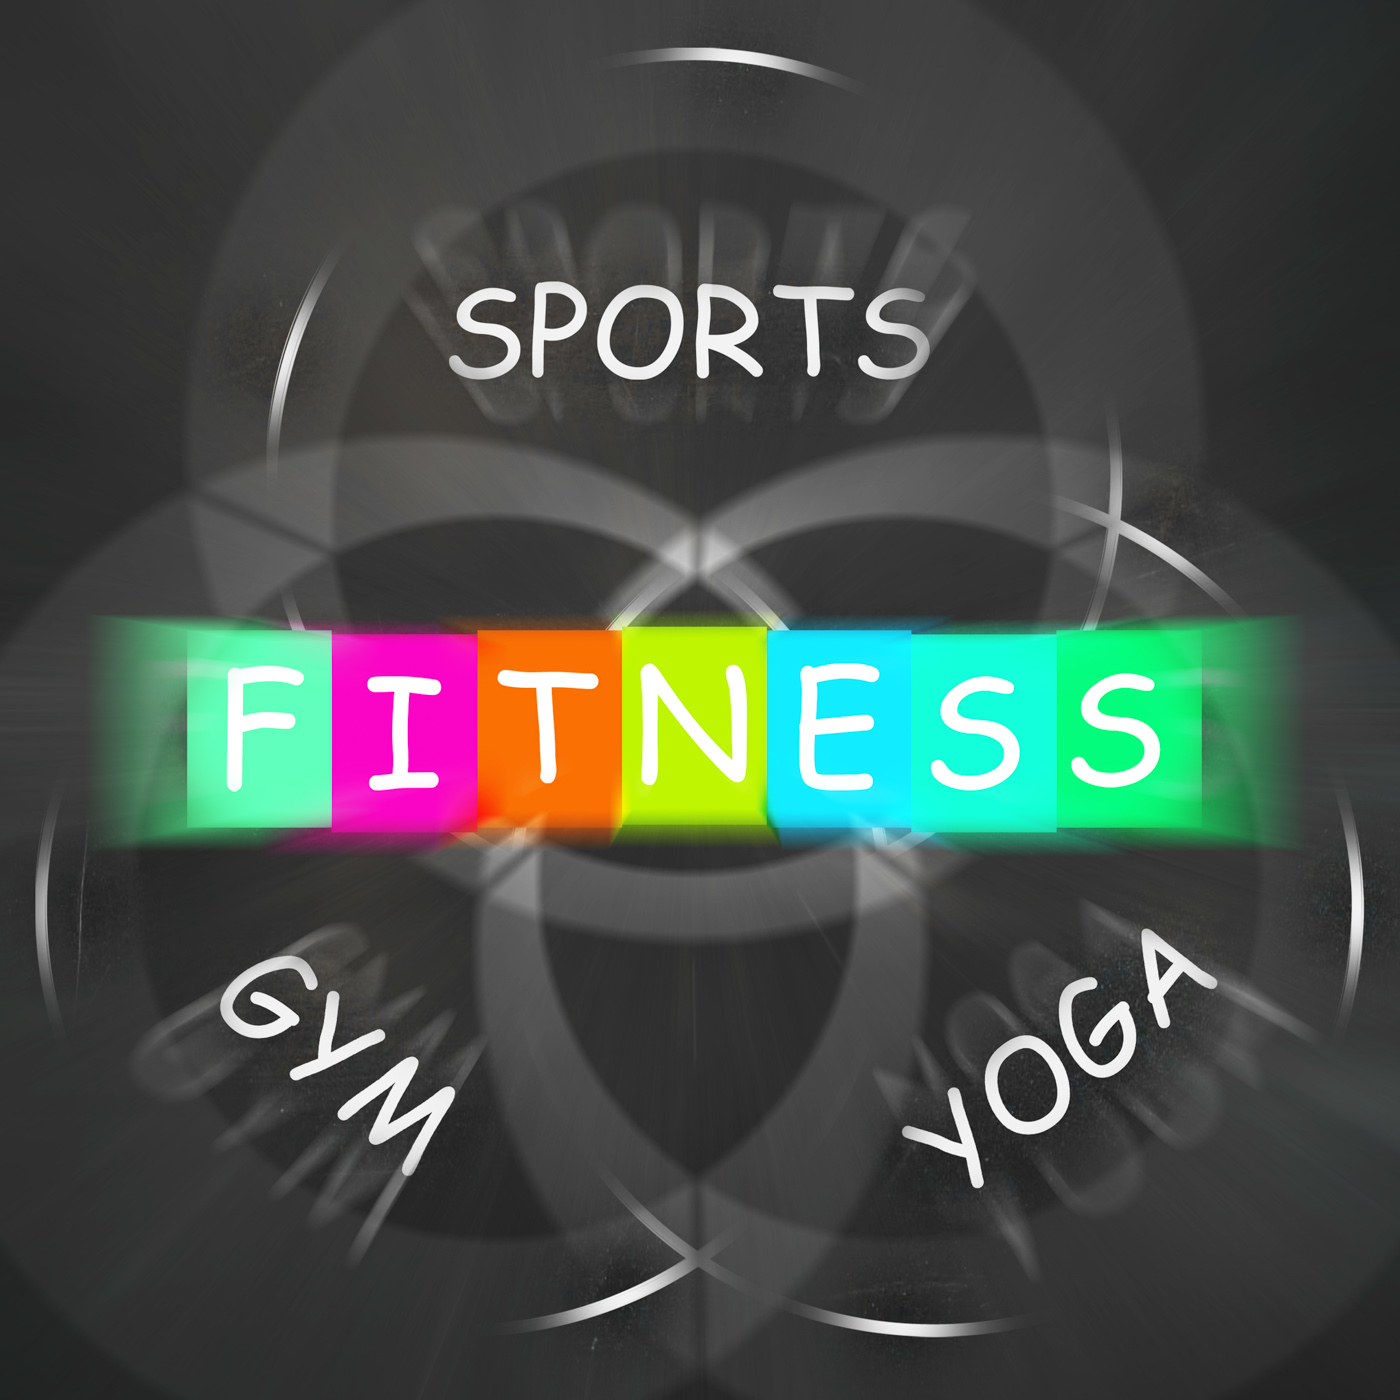 Fitness Activities Displays Sports Yoga and Gym Exercise, Gym, Workout, Workingout, Wellness, HQ Photo